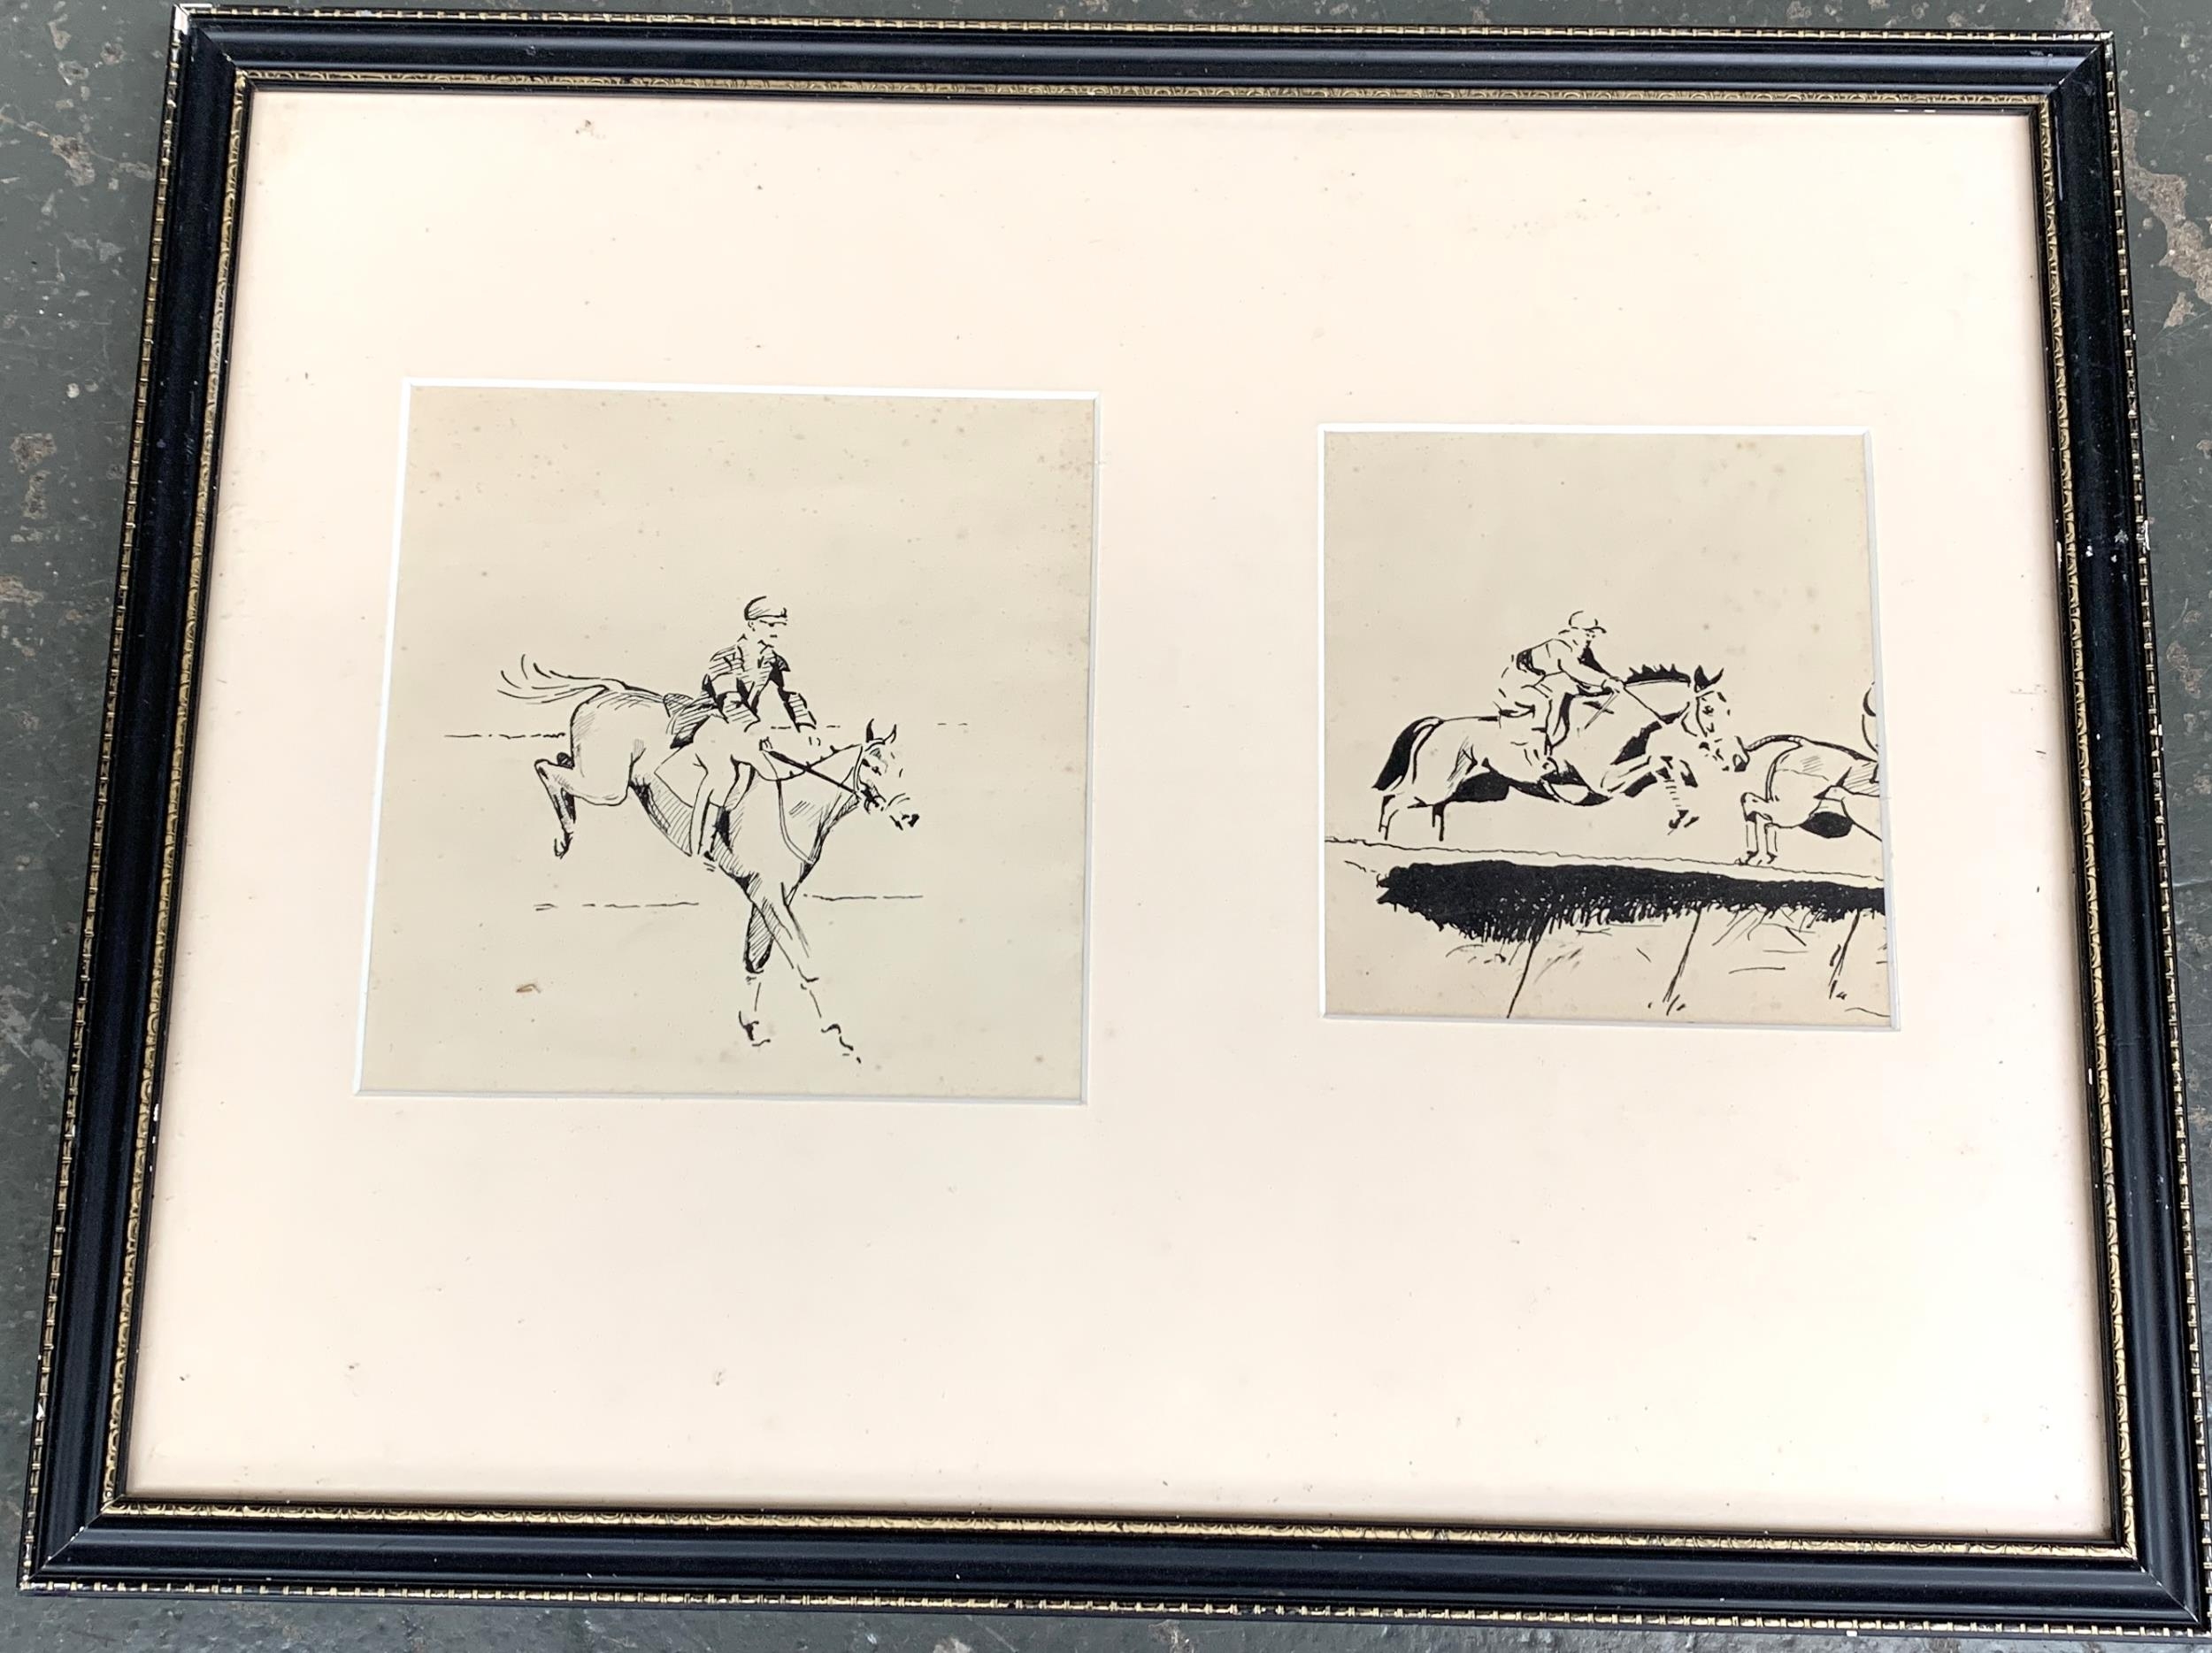 Two pen and ink studies of steeple chases mounted together, 17.5x17cm and 15x13cm